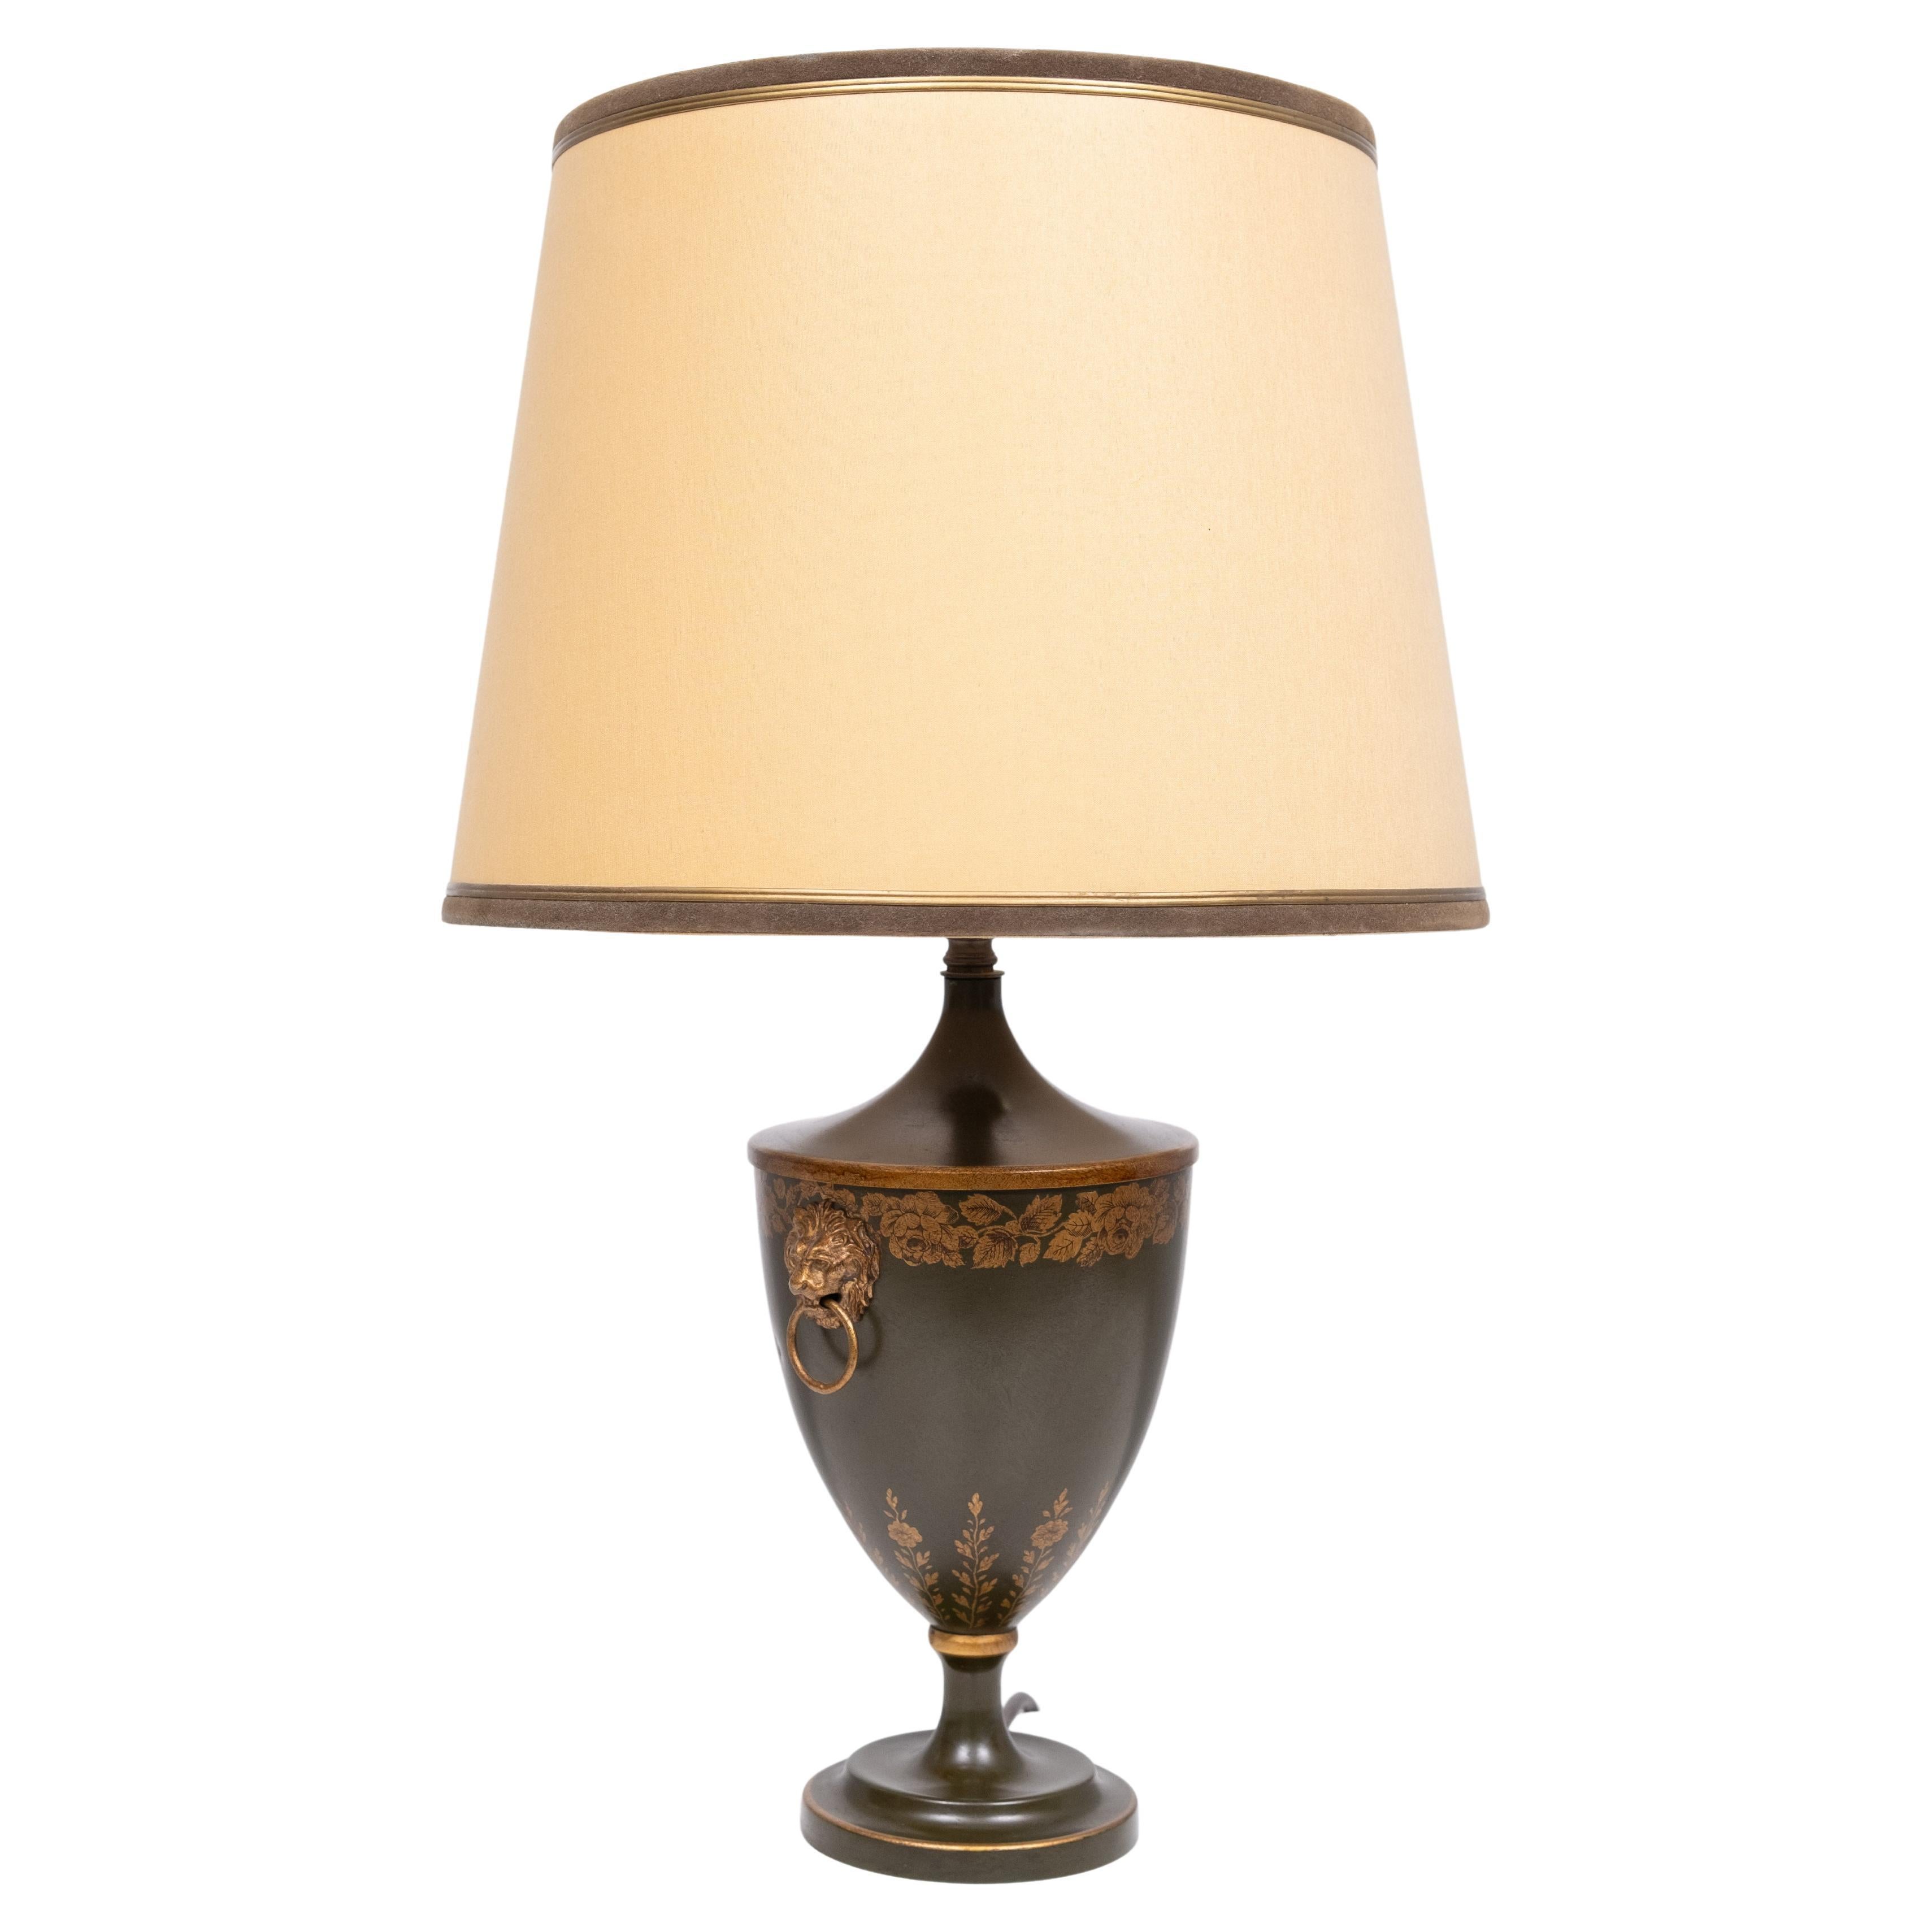 Empire Revival Table Lamps